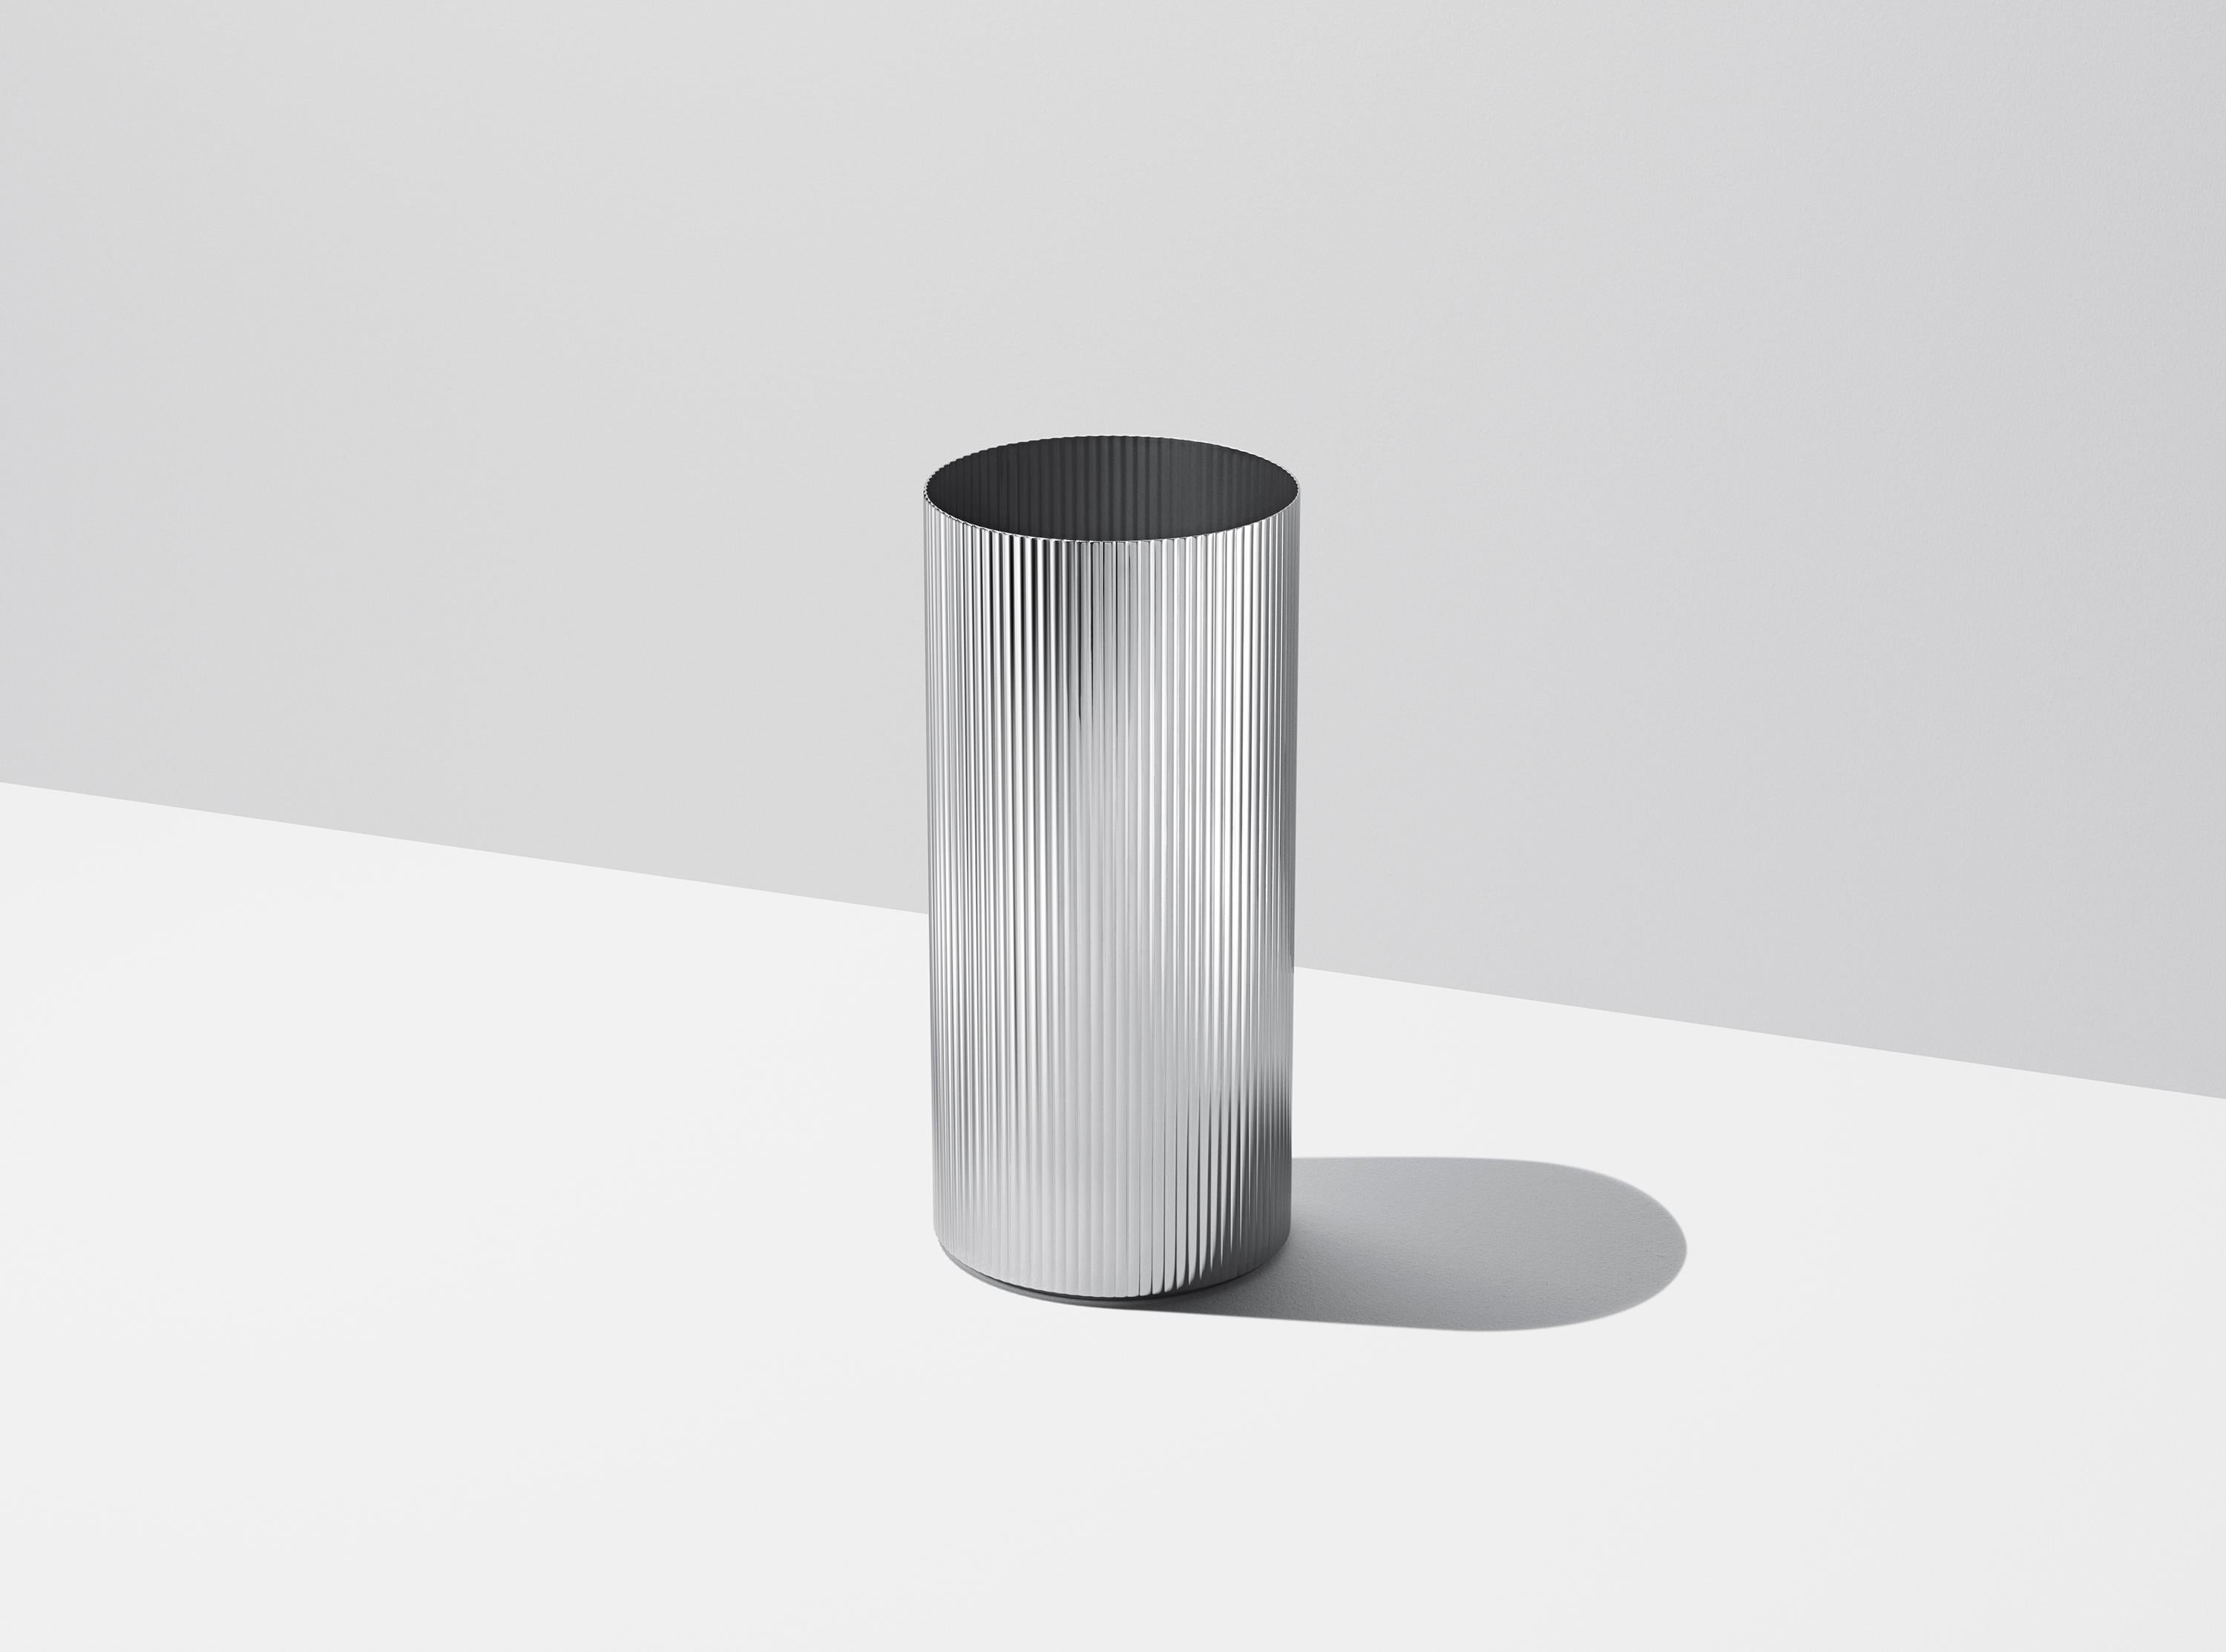 The elegantly riffled lines from the Functionalist period are applied with perfect ease on this timeless Scandinavian design vase. The result is Classic Georg Jensen: striking, modern and instantly recognisable. The Bernadotte vase is inspired by